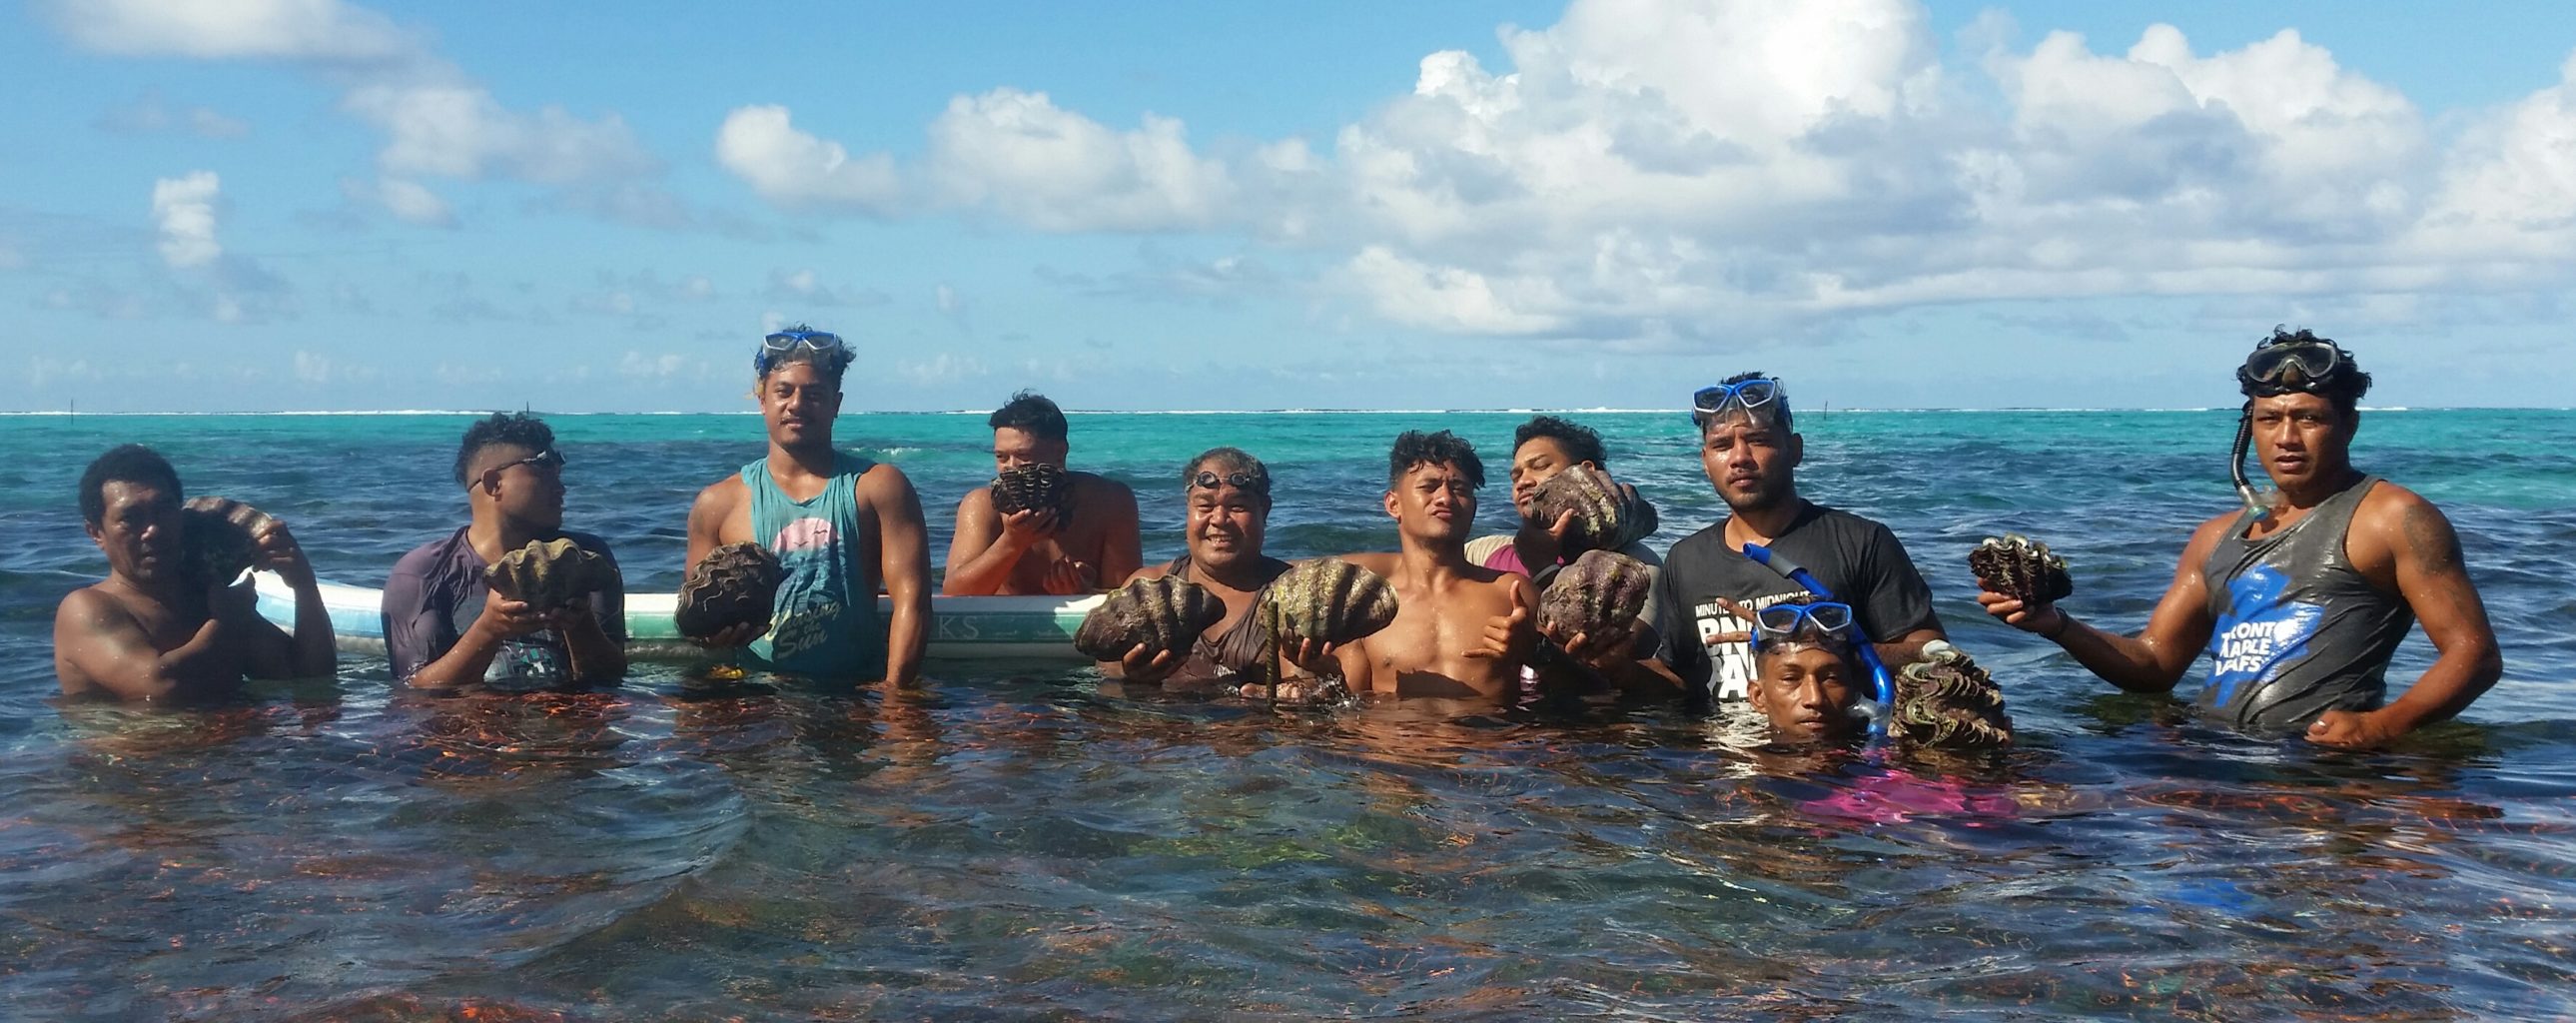 Mean from Setafao Saipipi Village, Samoa, hold giant clams in the water